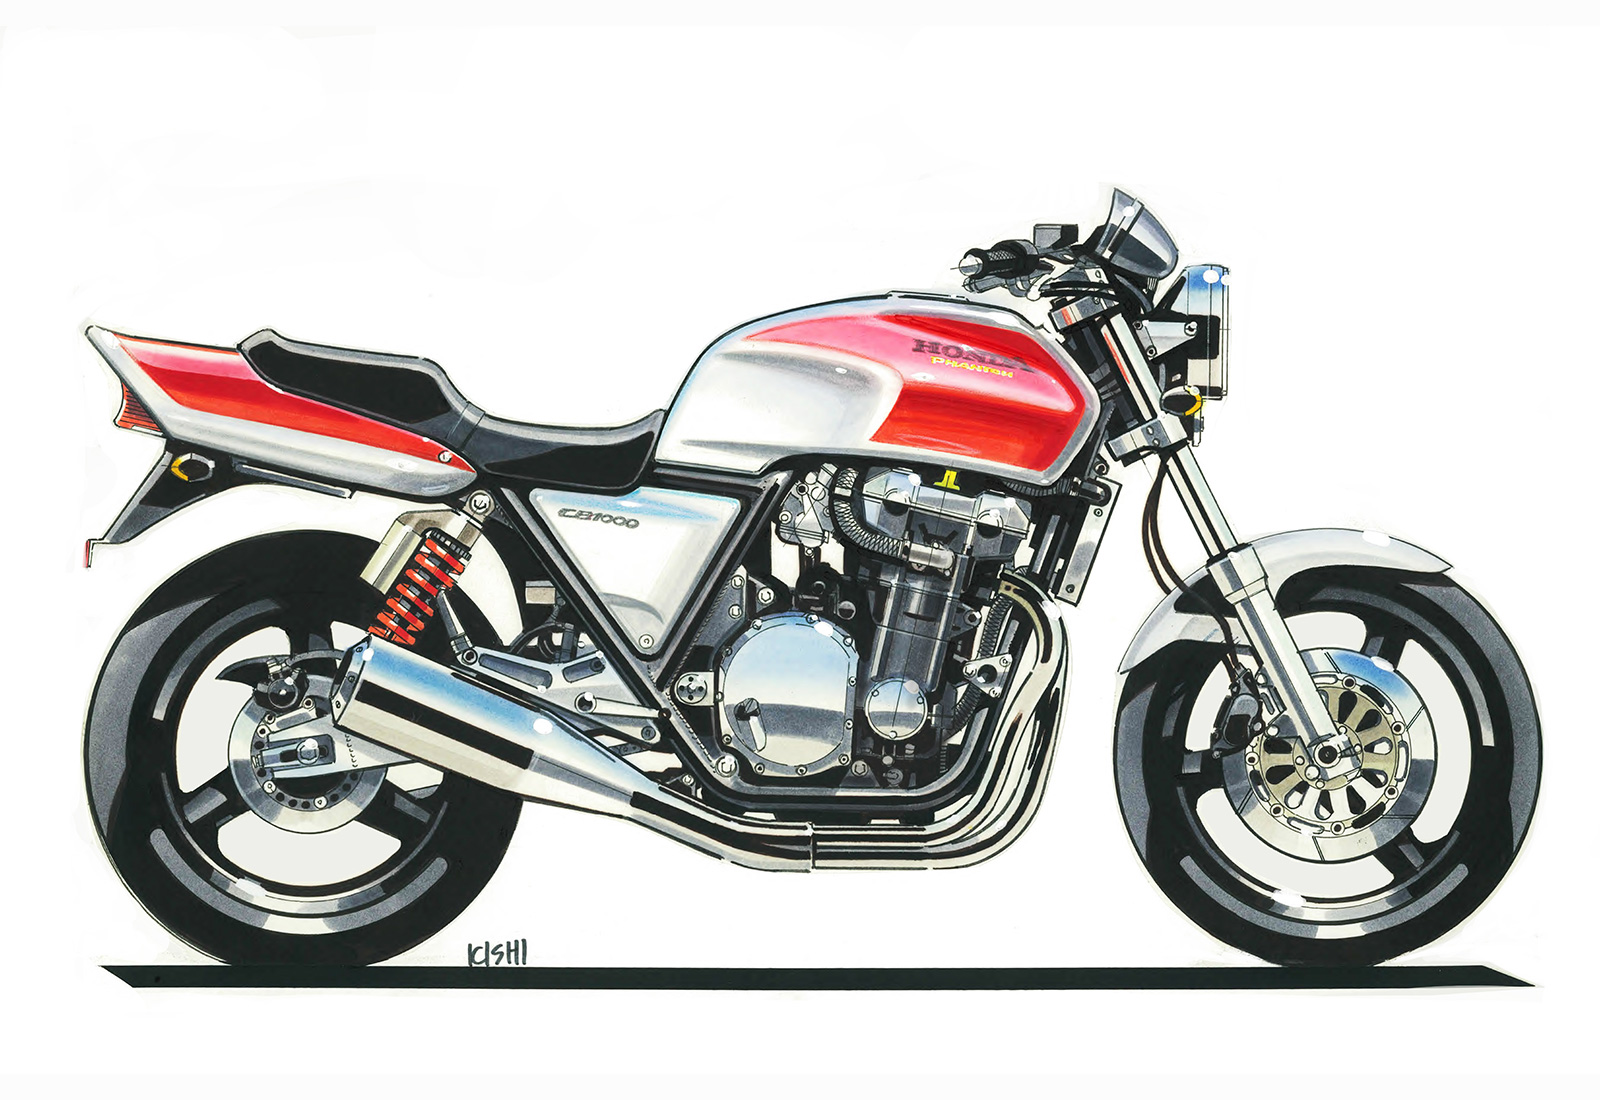 CB1000 SUPER FOUR final drawing